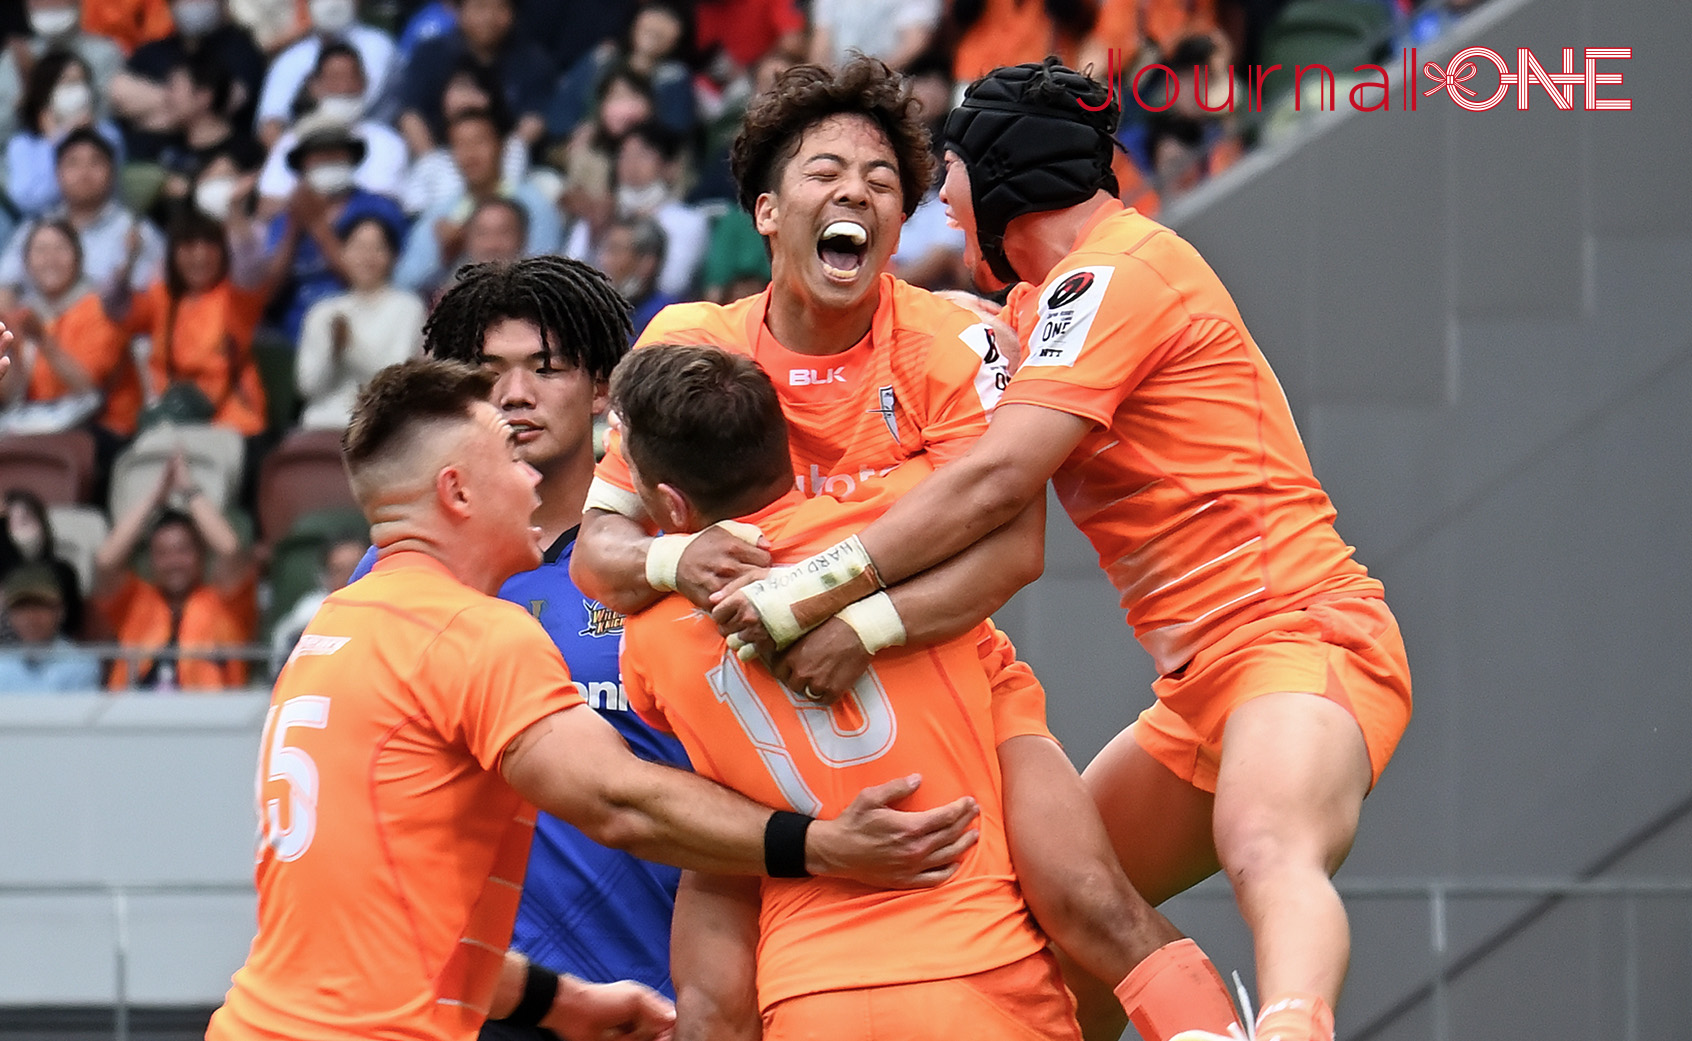 Japan Rugby League One final match,.Players of Kubota Spears Funabashi Tokyo Bay hugging each other and rejoicing at the moment the championship was decided. ; Photo by Journal-ONE